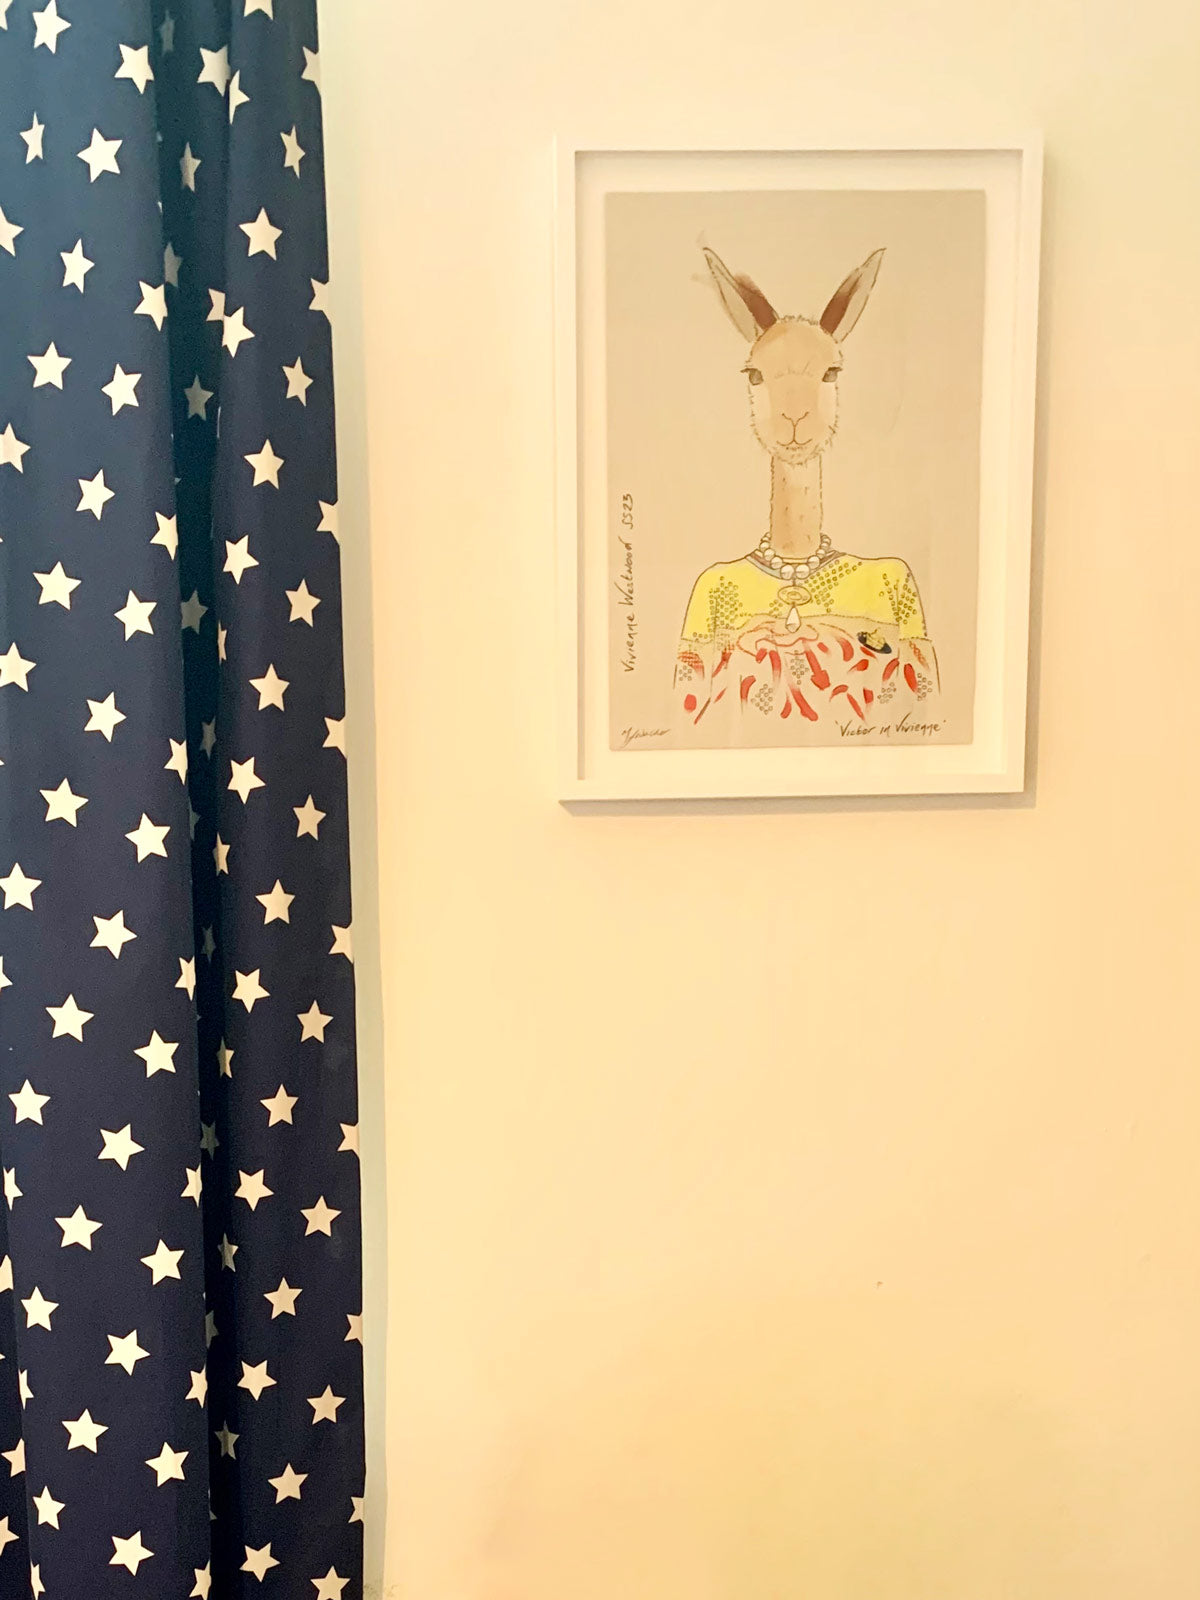 Colourful illustration of a Kangaroo in designer Vivienne Westwood clothing on a white wall.